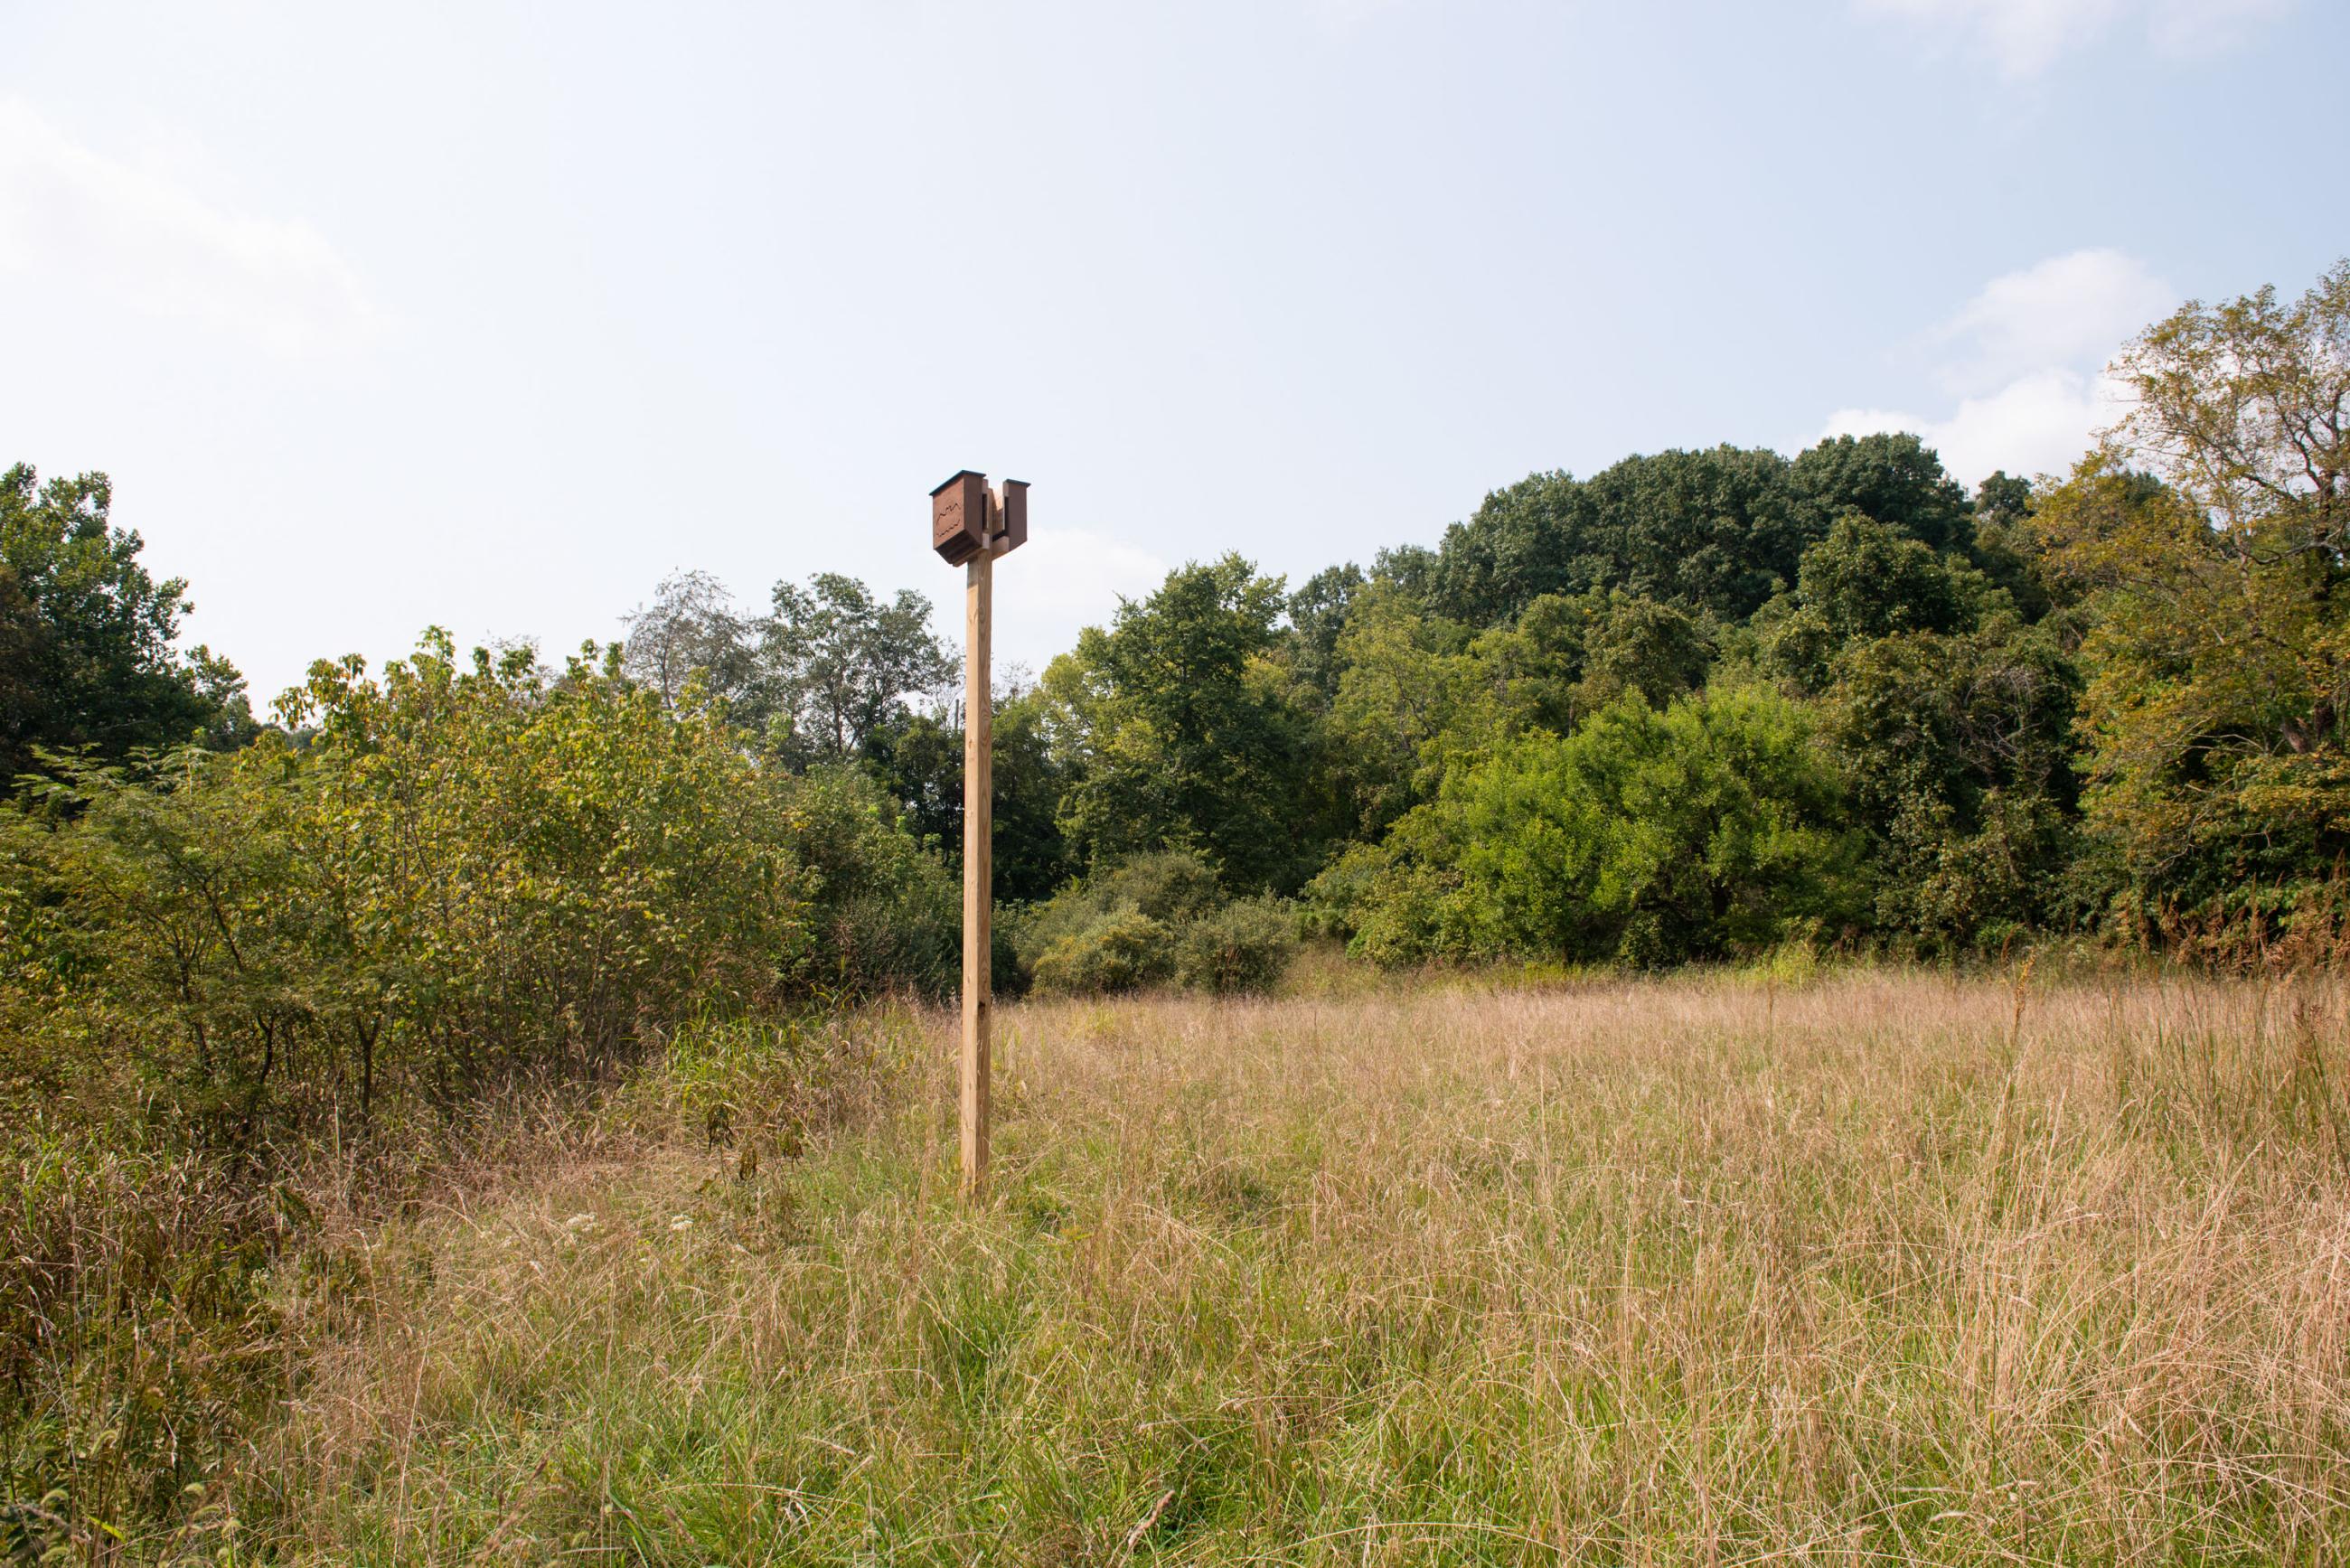 A bat house on a wooden post in a field.